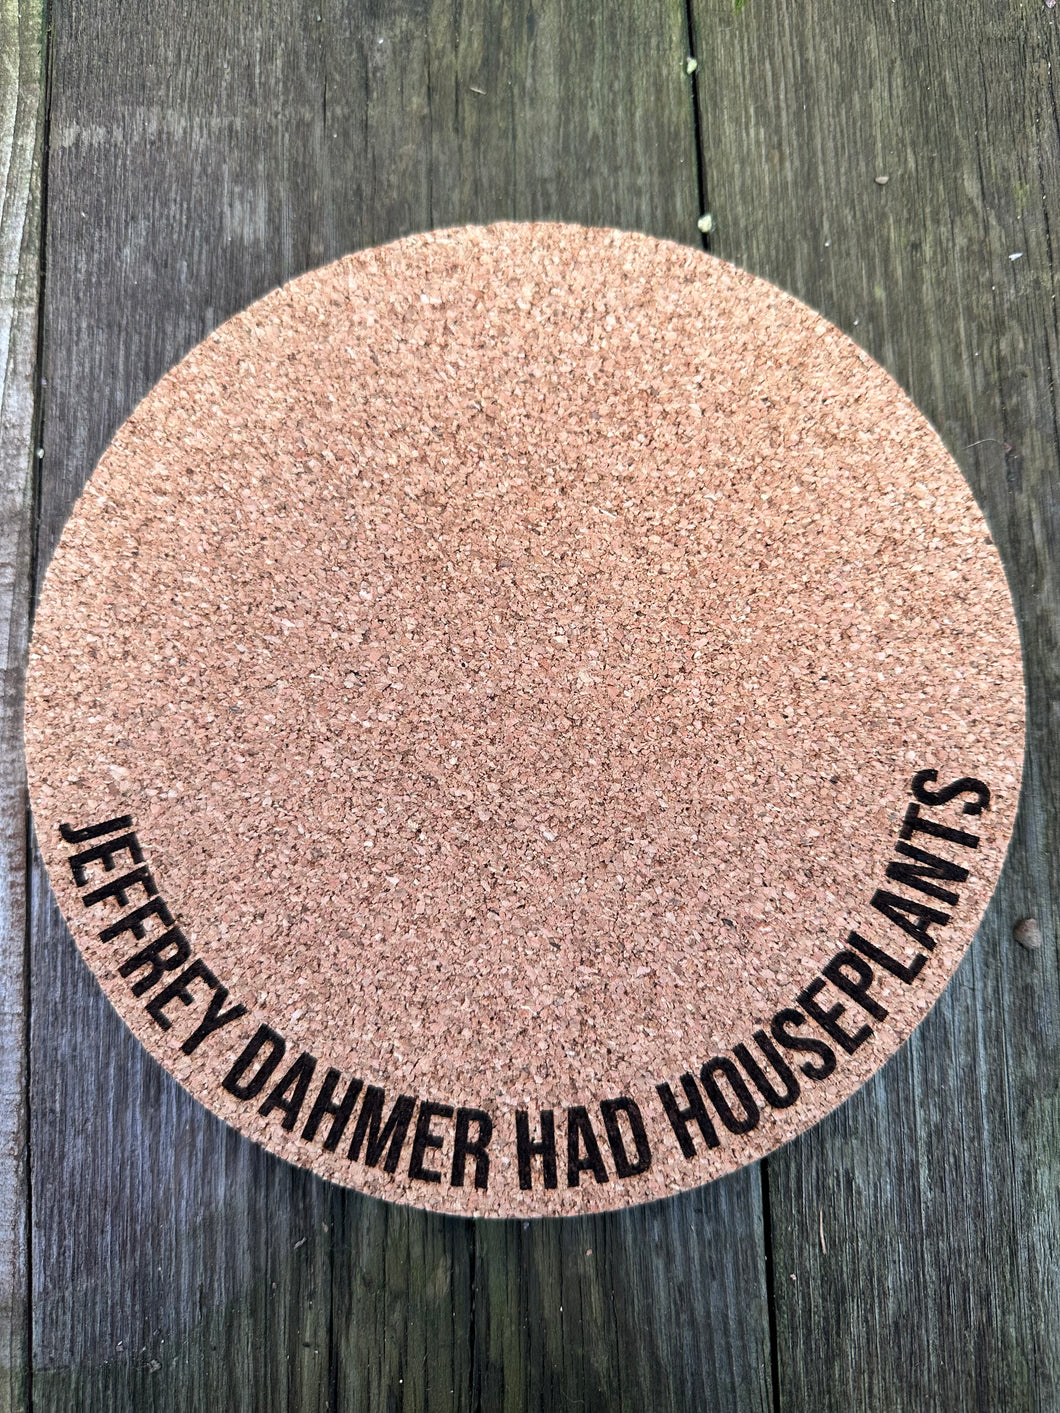 Jeffrey Dahmer Had Houseplants Cork Plant Mat - Engraved Cork Round - Cork Bottom - No Plastic or Rubber - All Natural Material